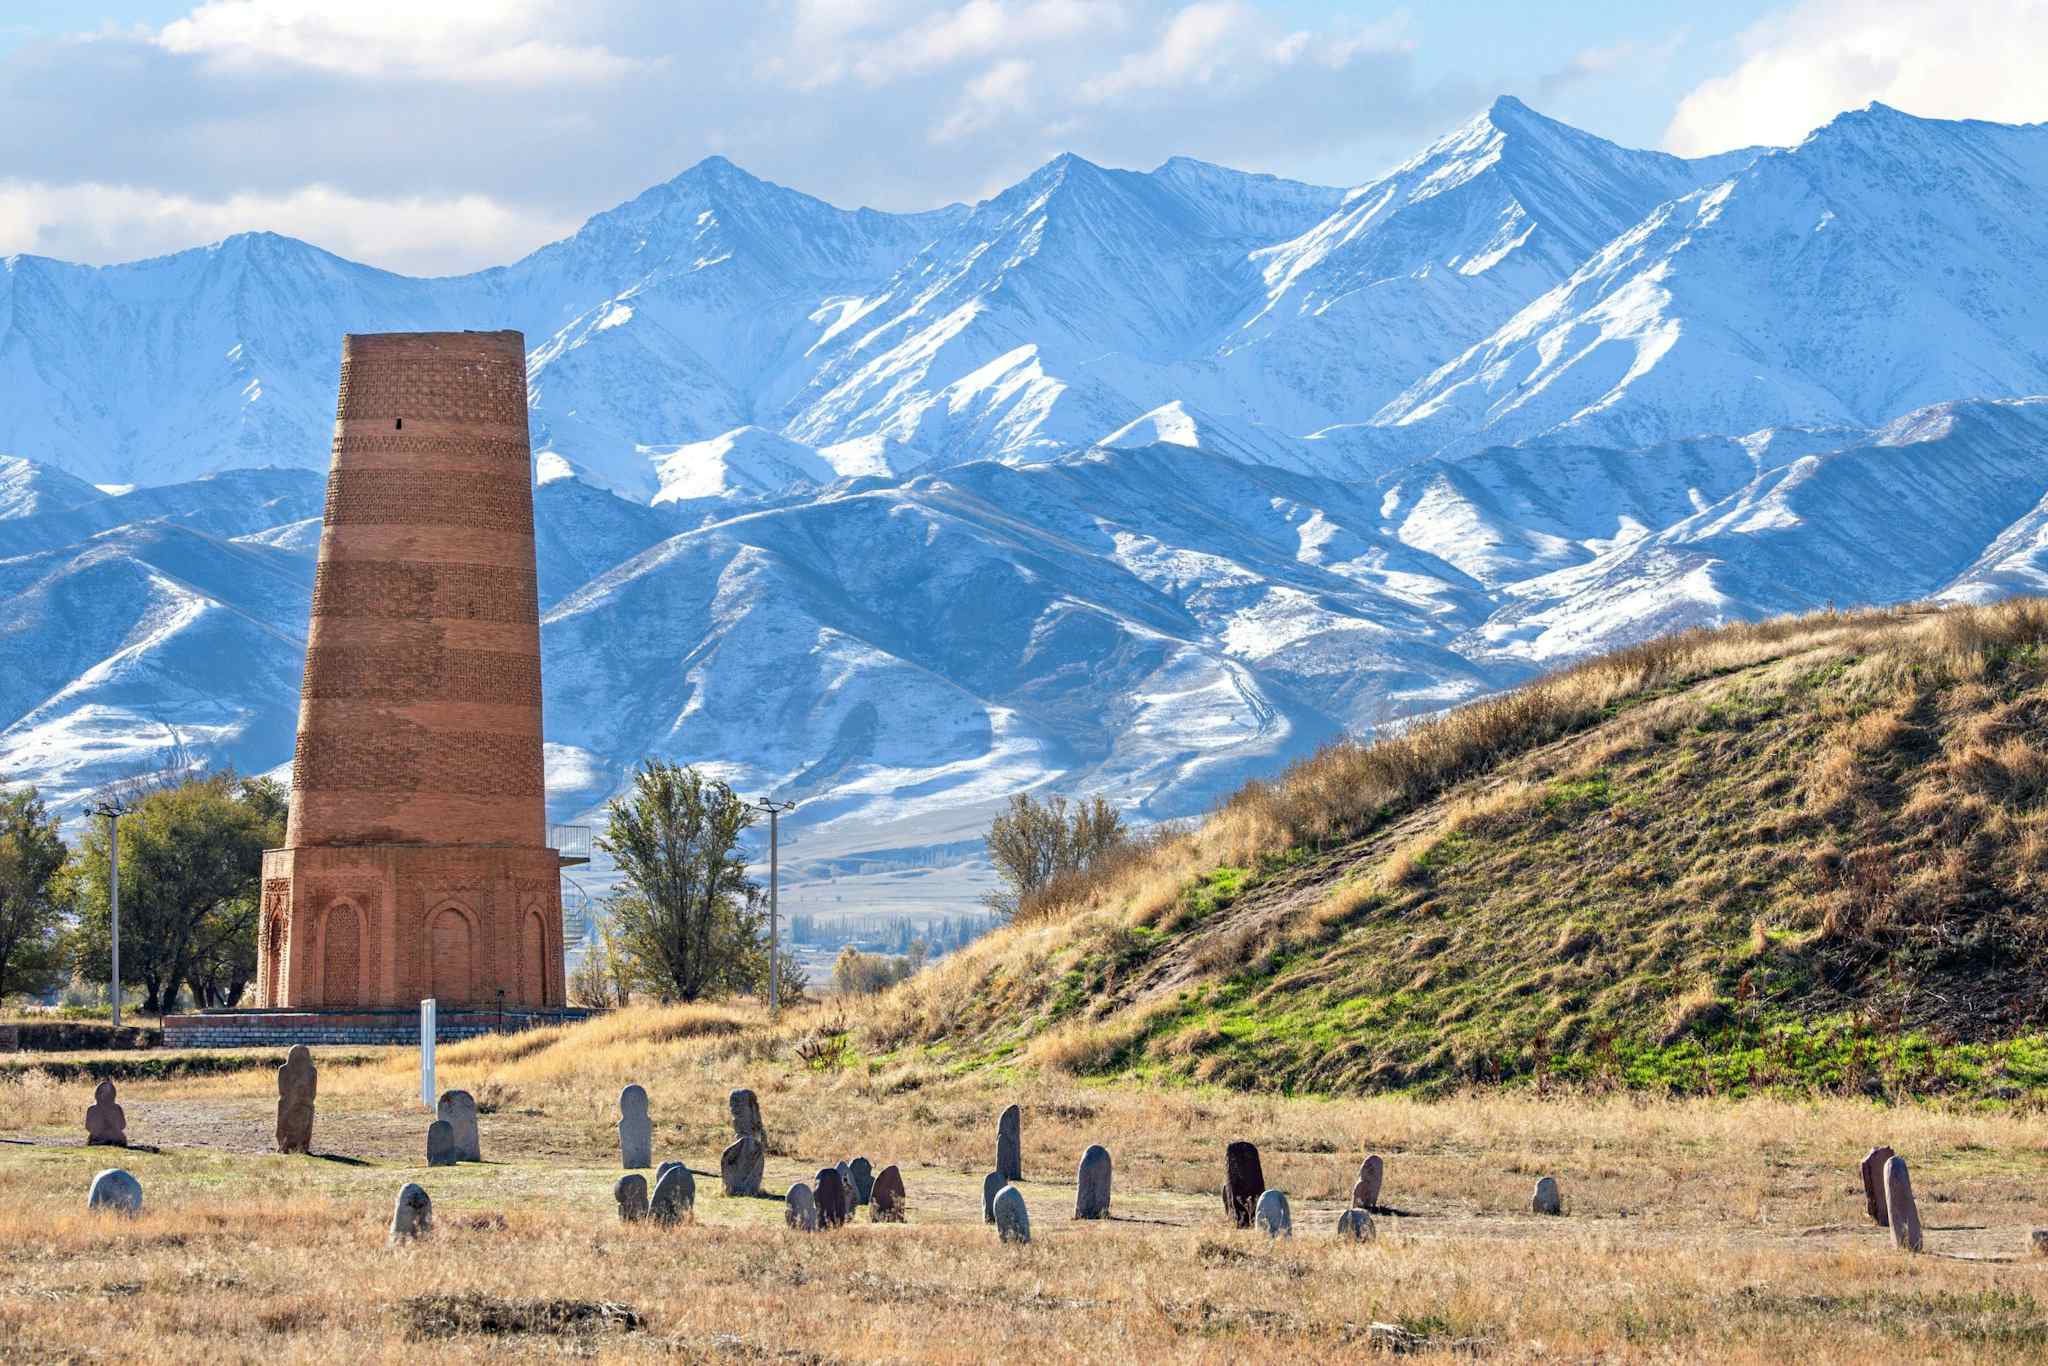 Burana Tower and the surrounding Babel stones, with snowy mountains behind, in Kyrgyzstan.